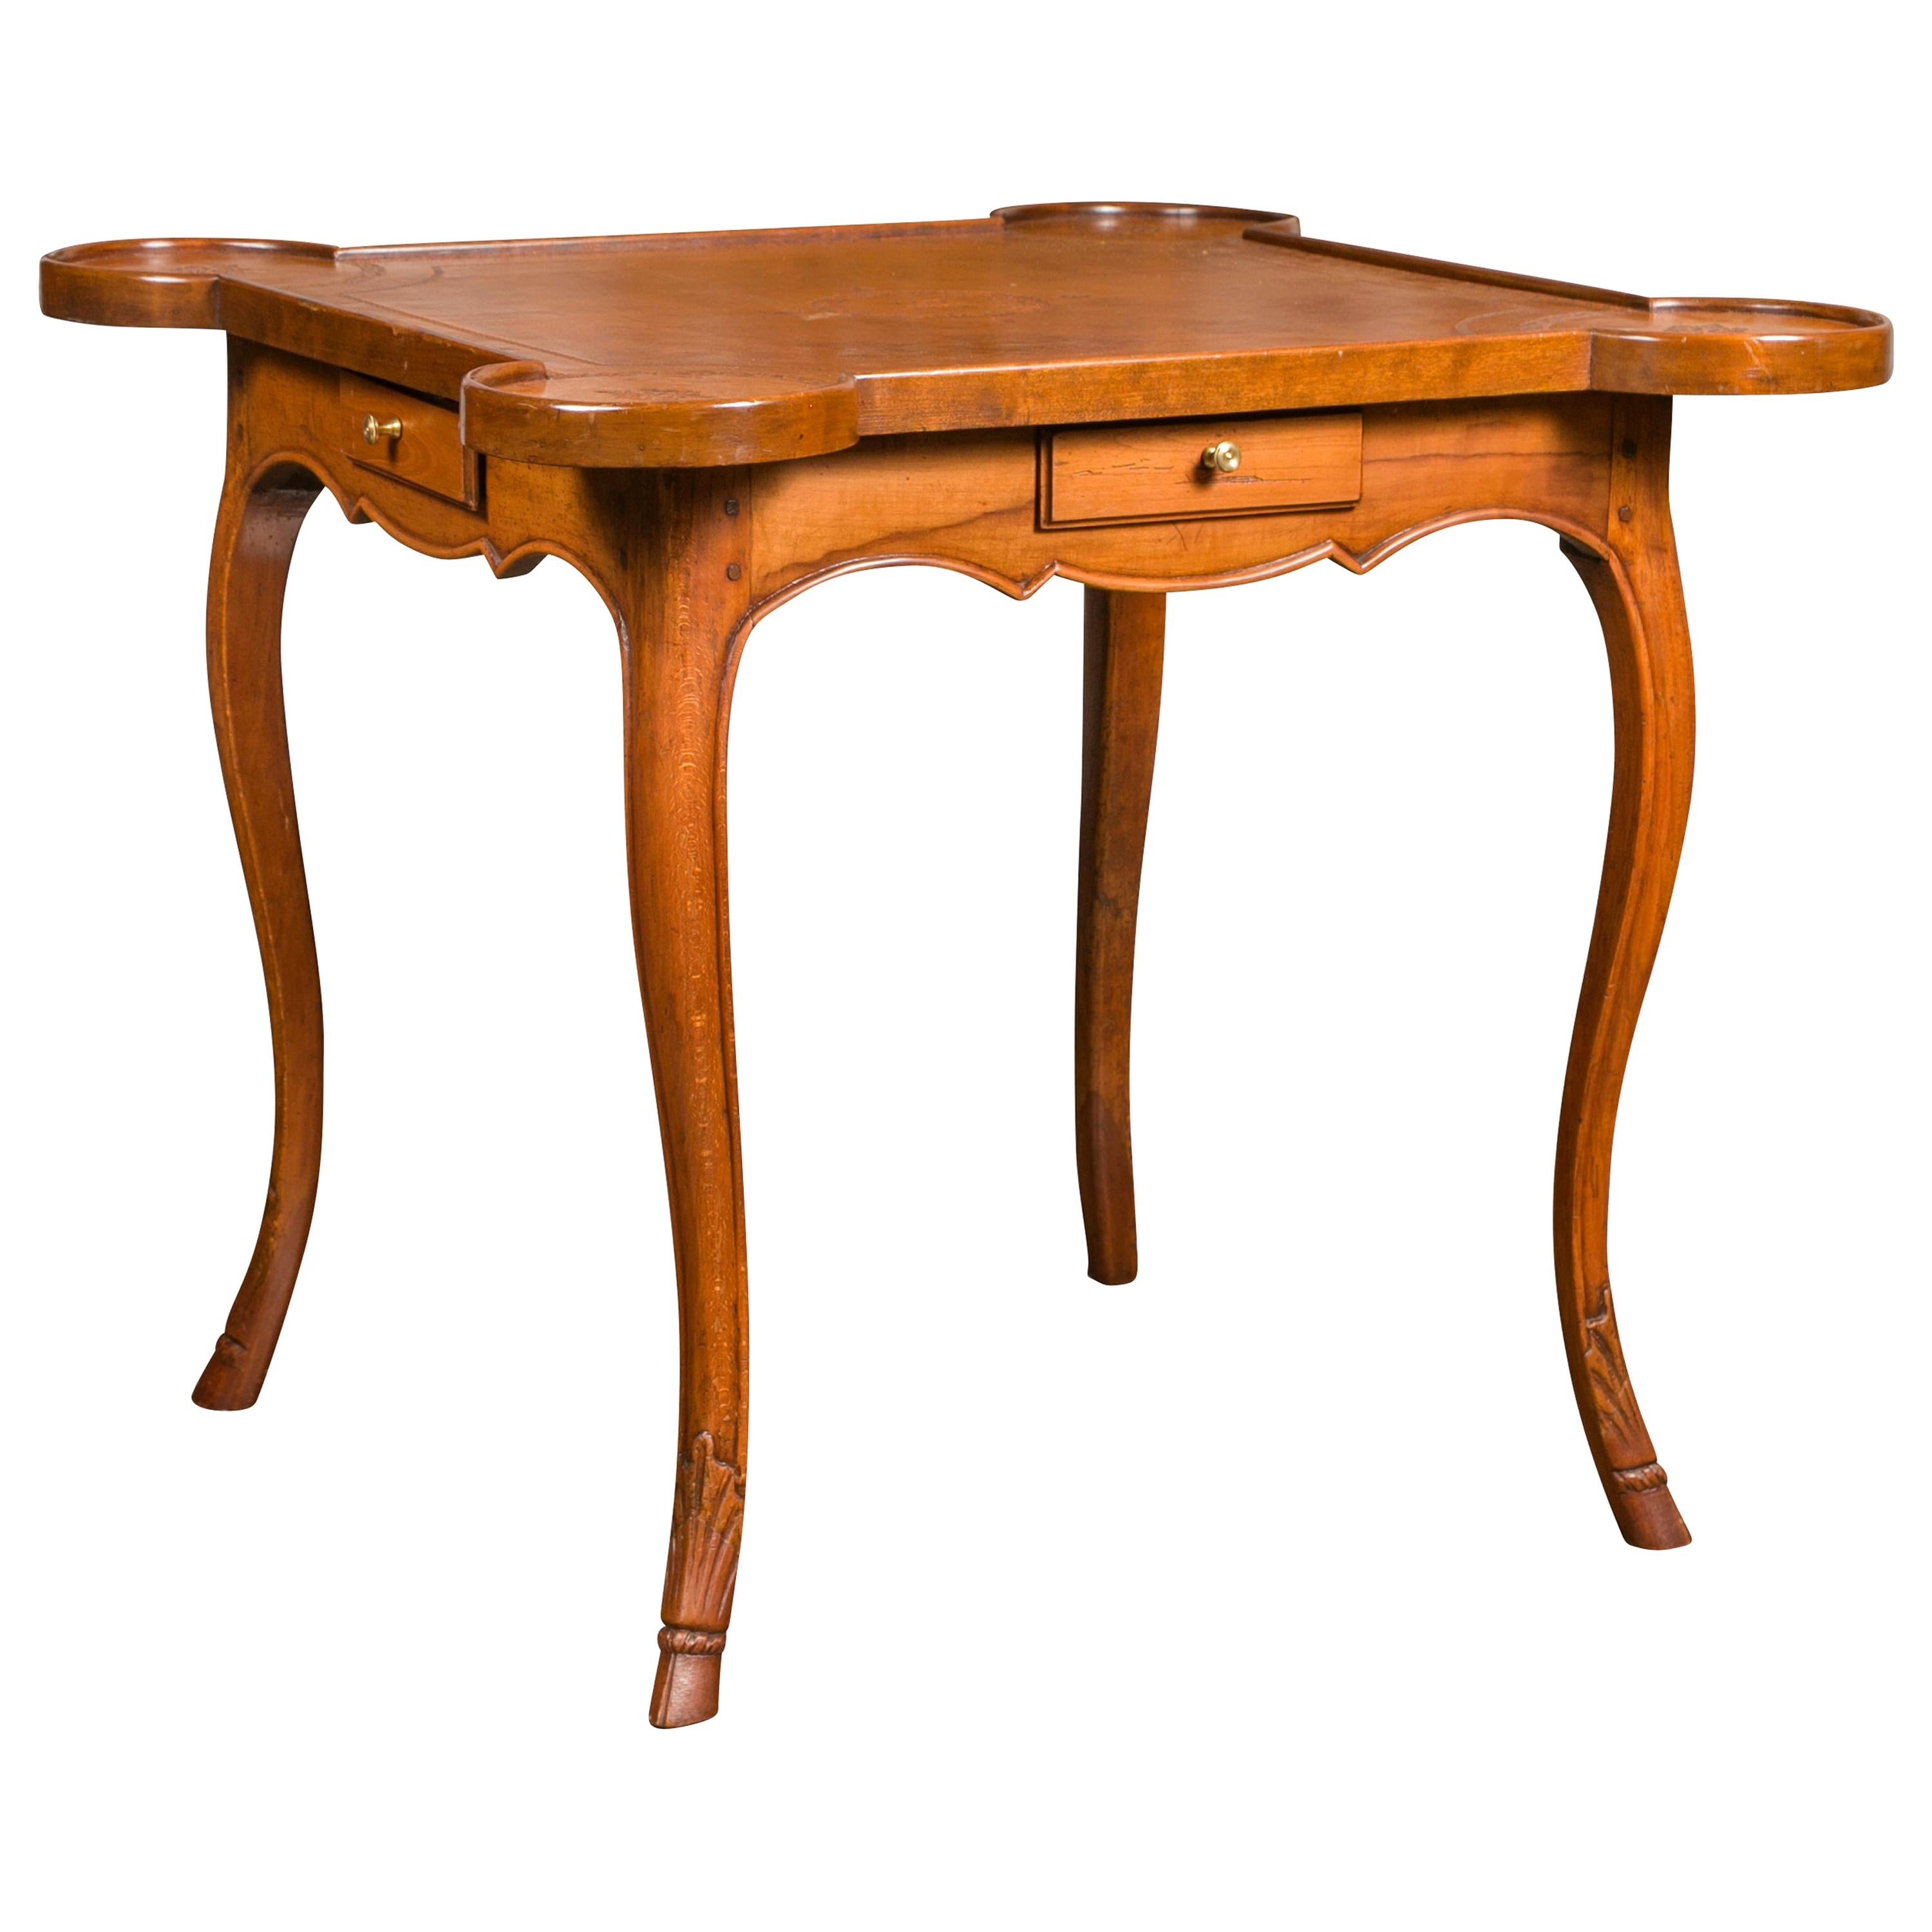 French 1860s Napoleon III Walnut Game Table with Four Drawers and Cabriole Legs